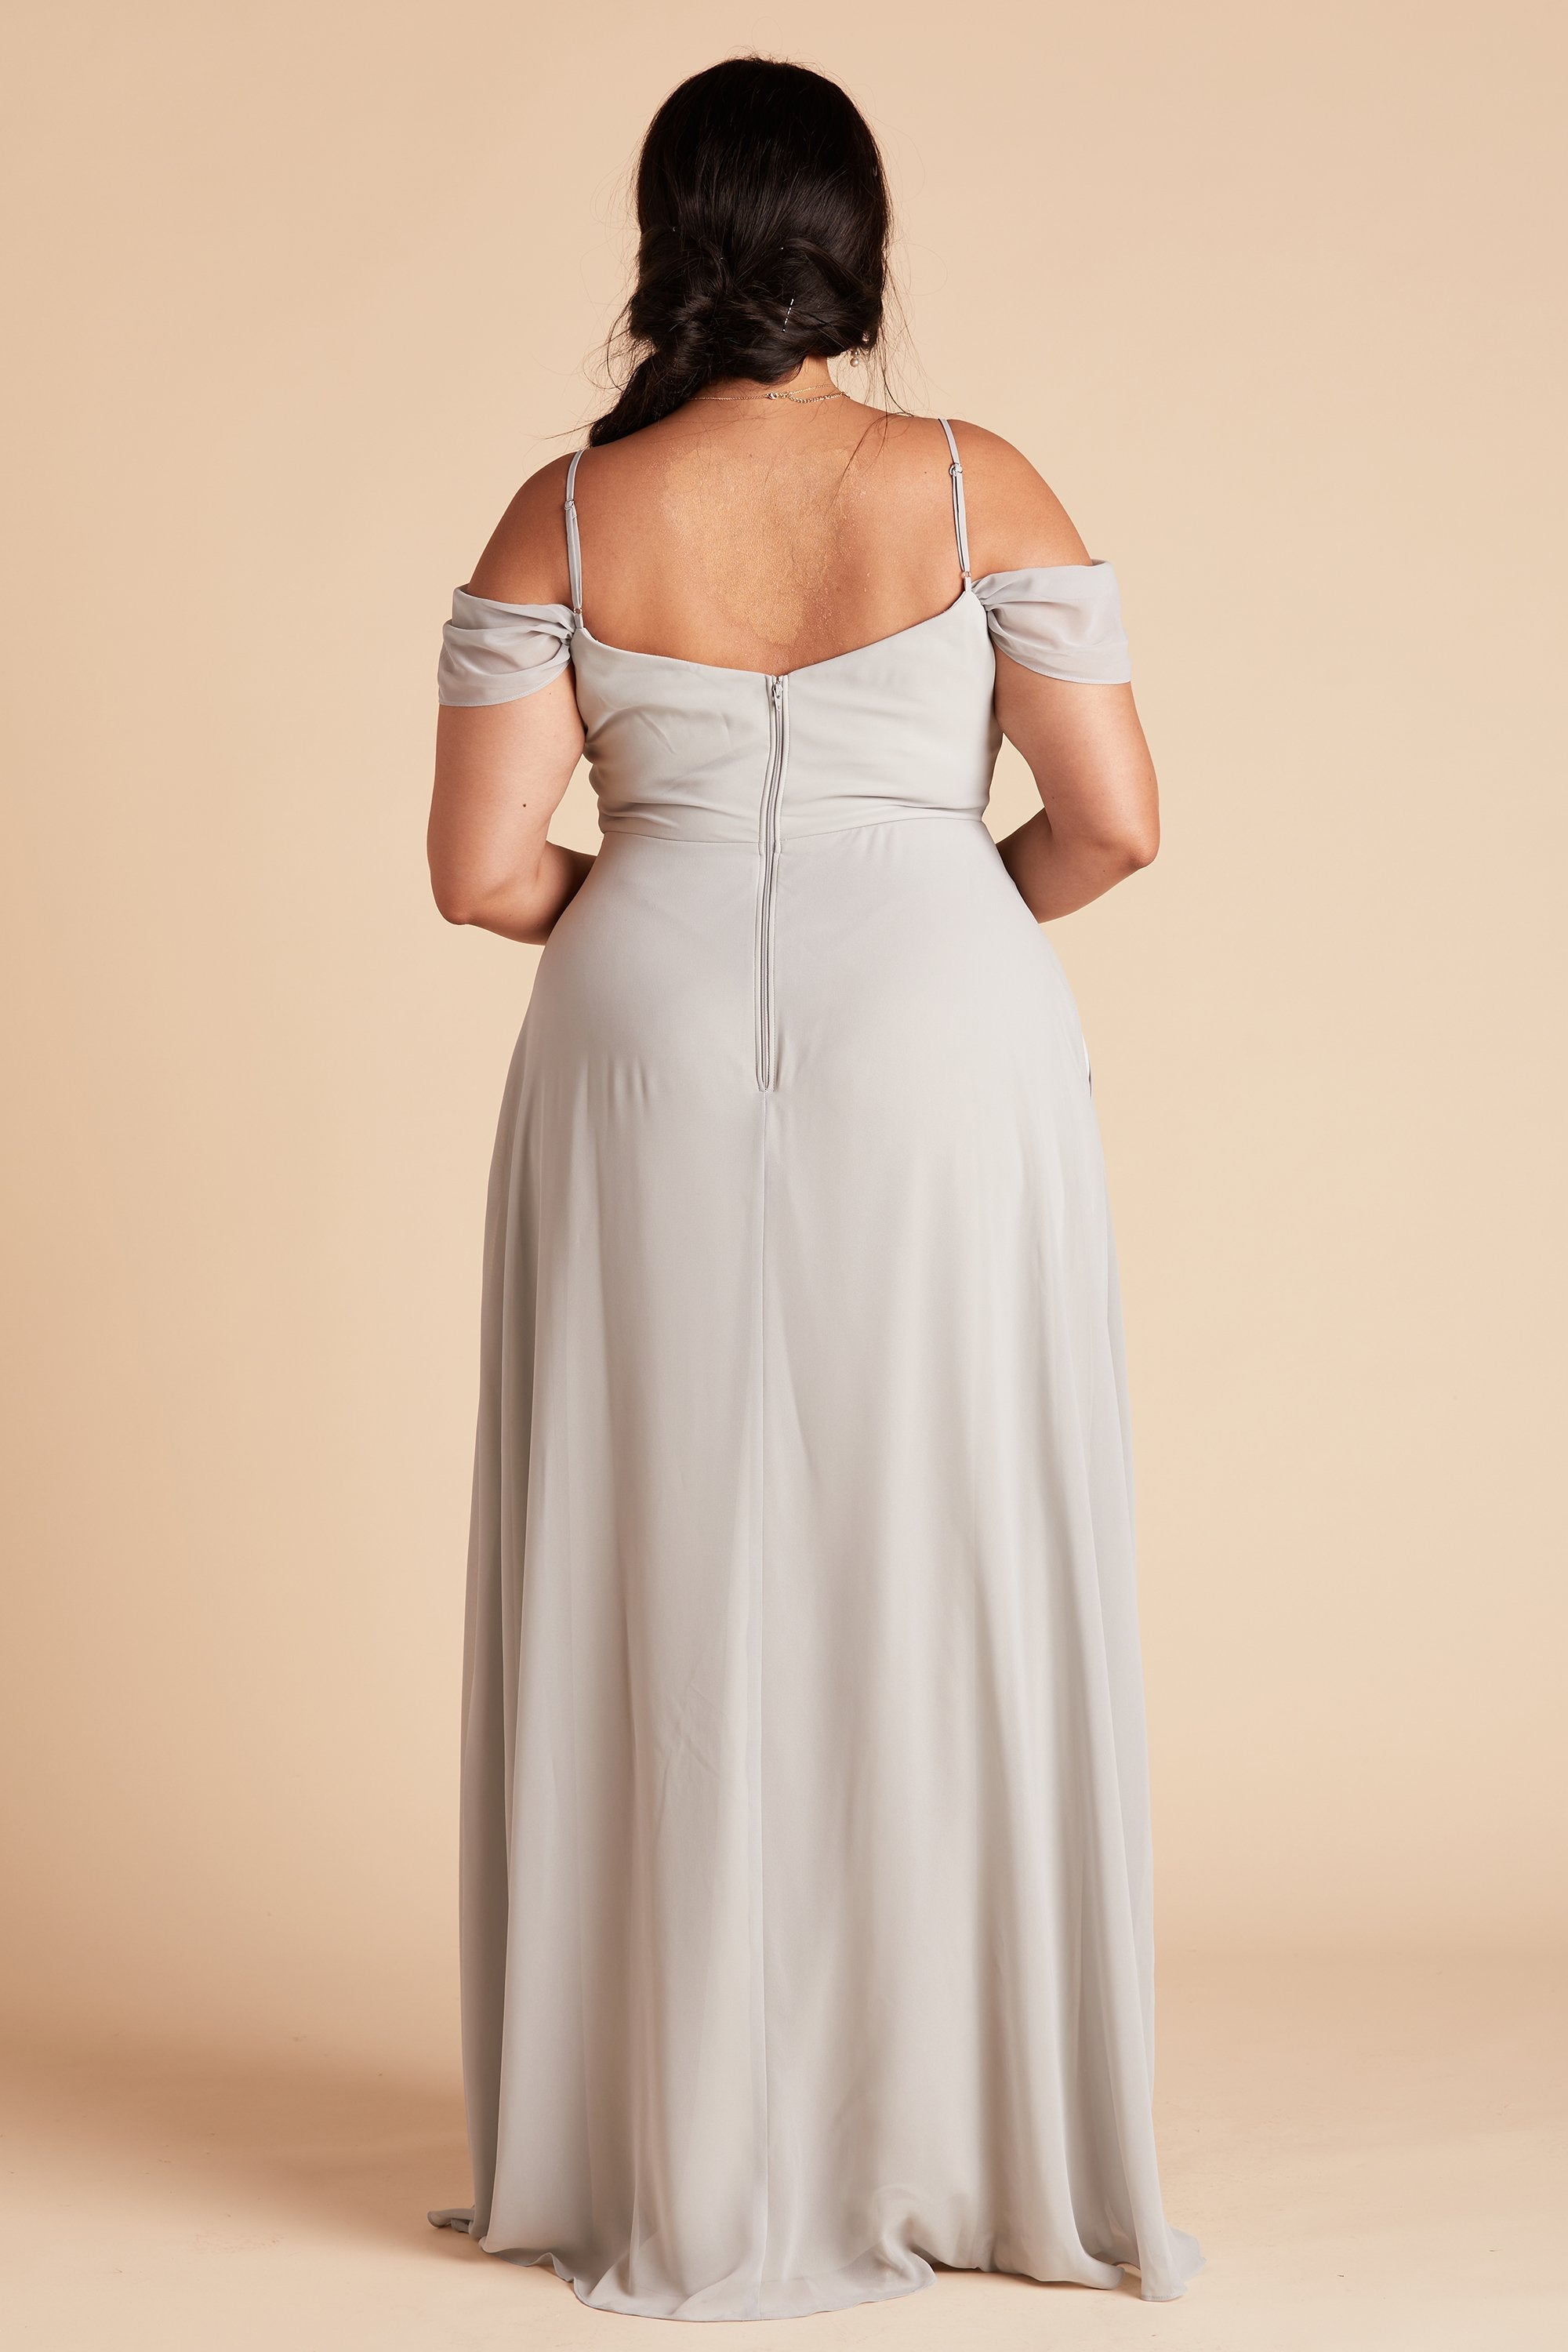 Devin convertible plus size bridesmaid dress in dove gray chiffon by Birdy Grey, back view